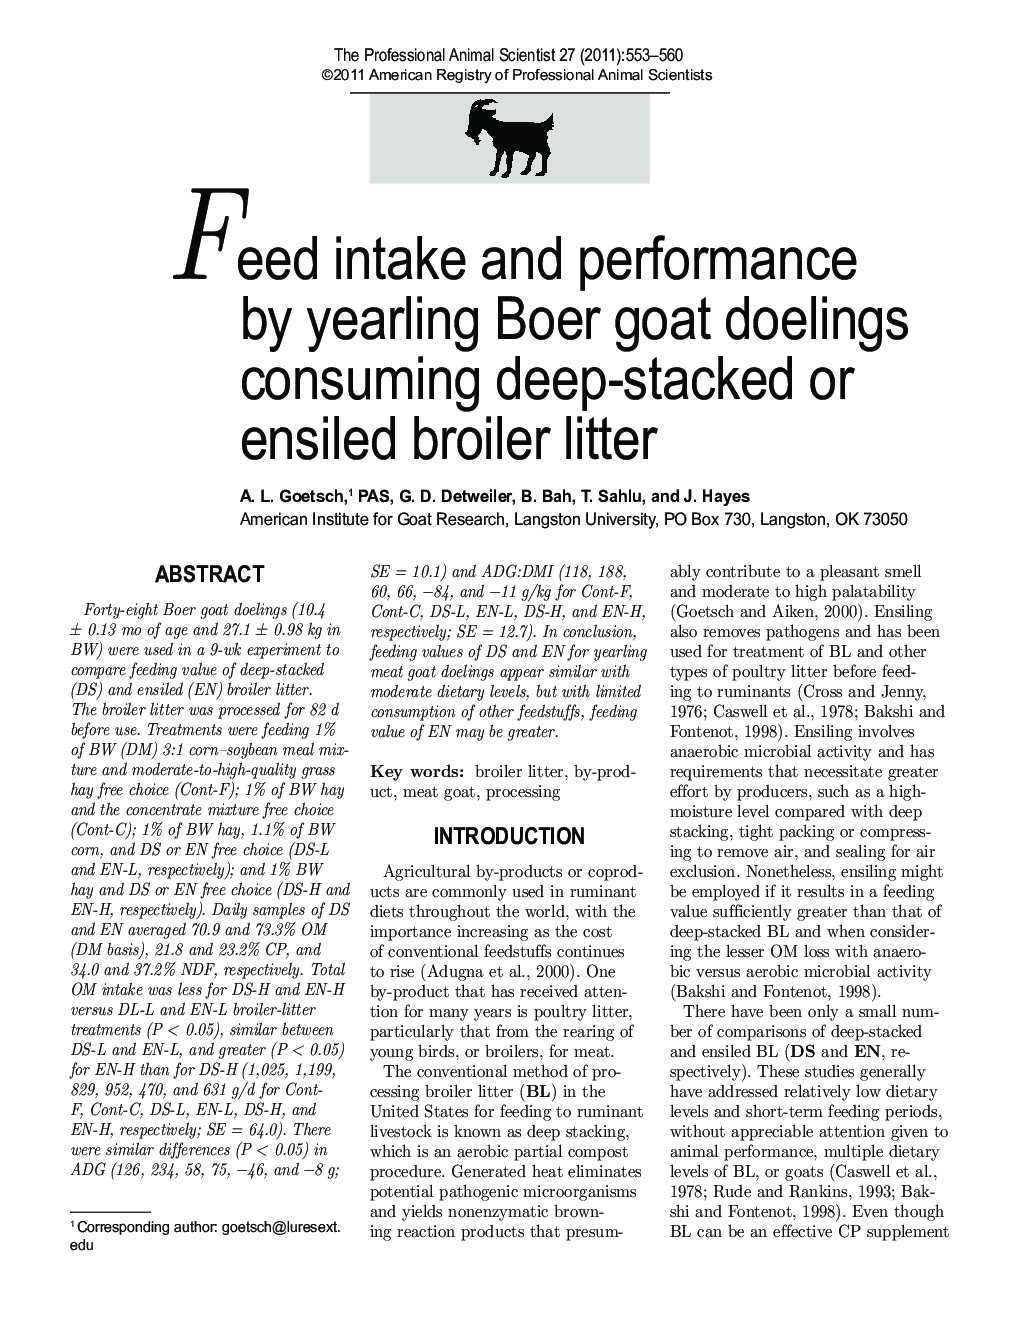 Feed intake and performance by yearling Boer goat doelings consuming deep-stacked or ensiled broiler litter